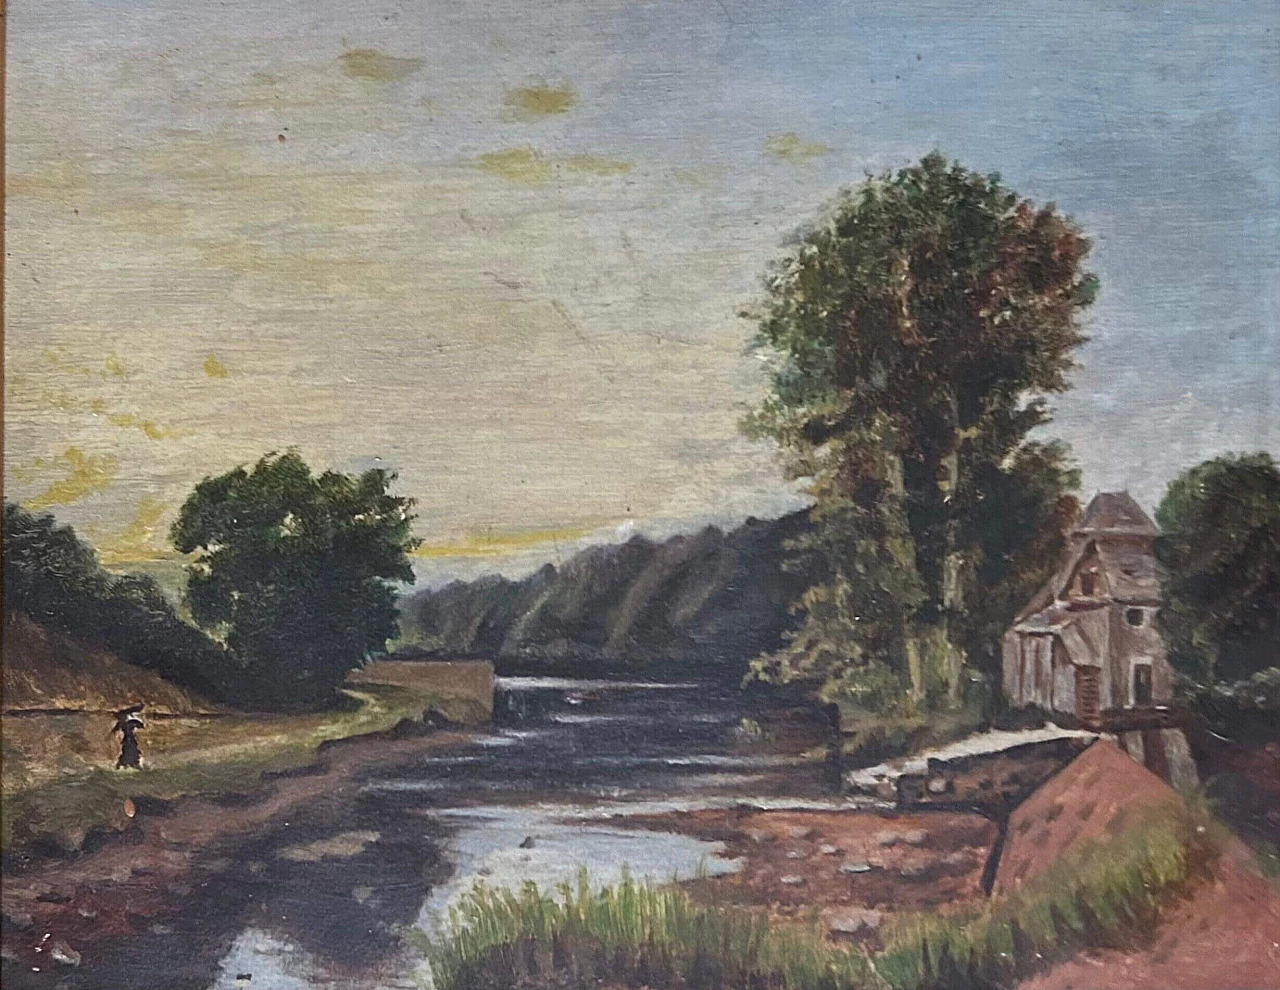 Lake landscape in the style of the Barbizon School, painting, 1920s 7